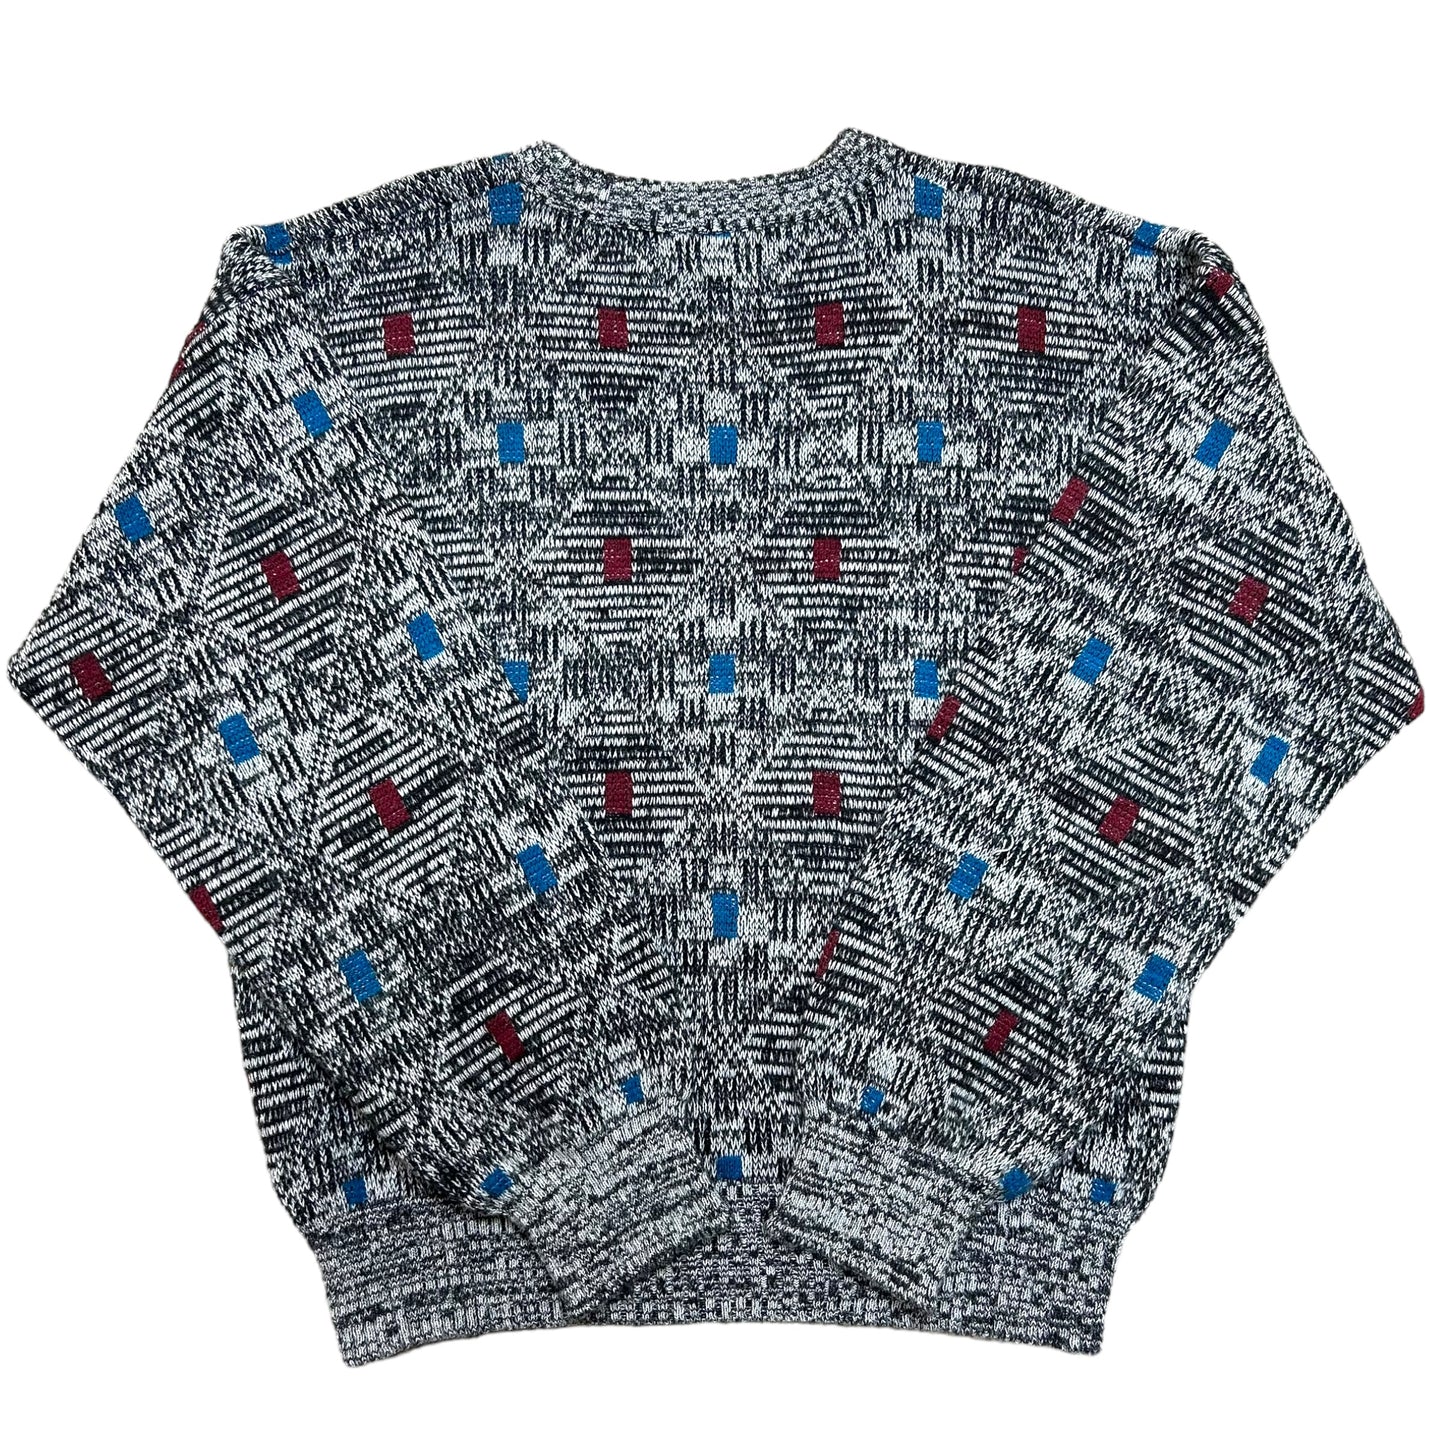 Vintage 1990s “Shades” Geometric Design Grey/Red/Blue Knit Sweater - Size Large